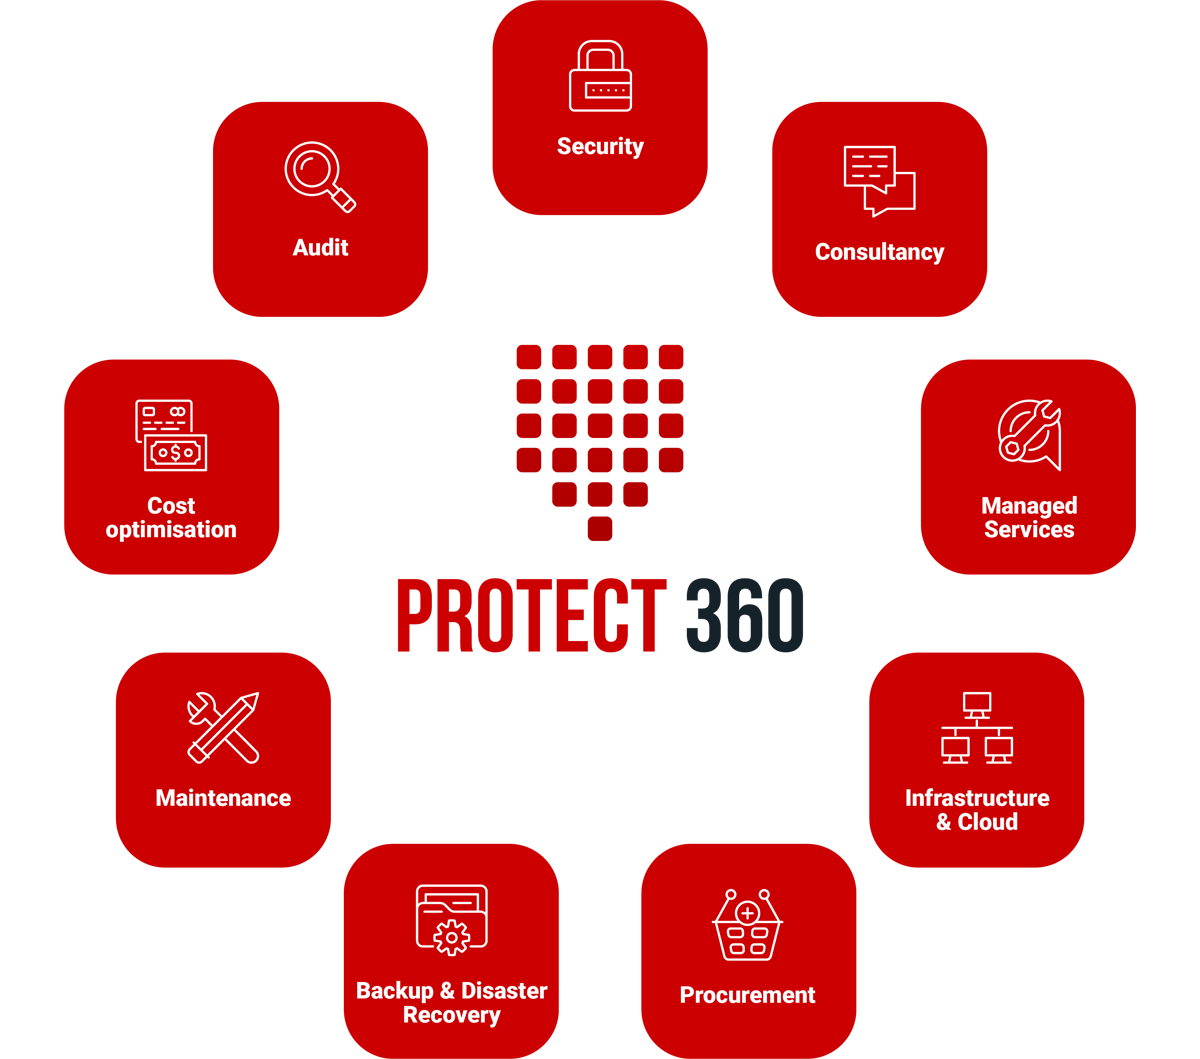 https://www.threatprotect.co.uk/wp-content/uploads/2020/08/Protect-360-diagram.png